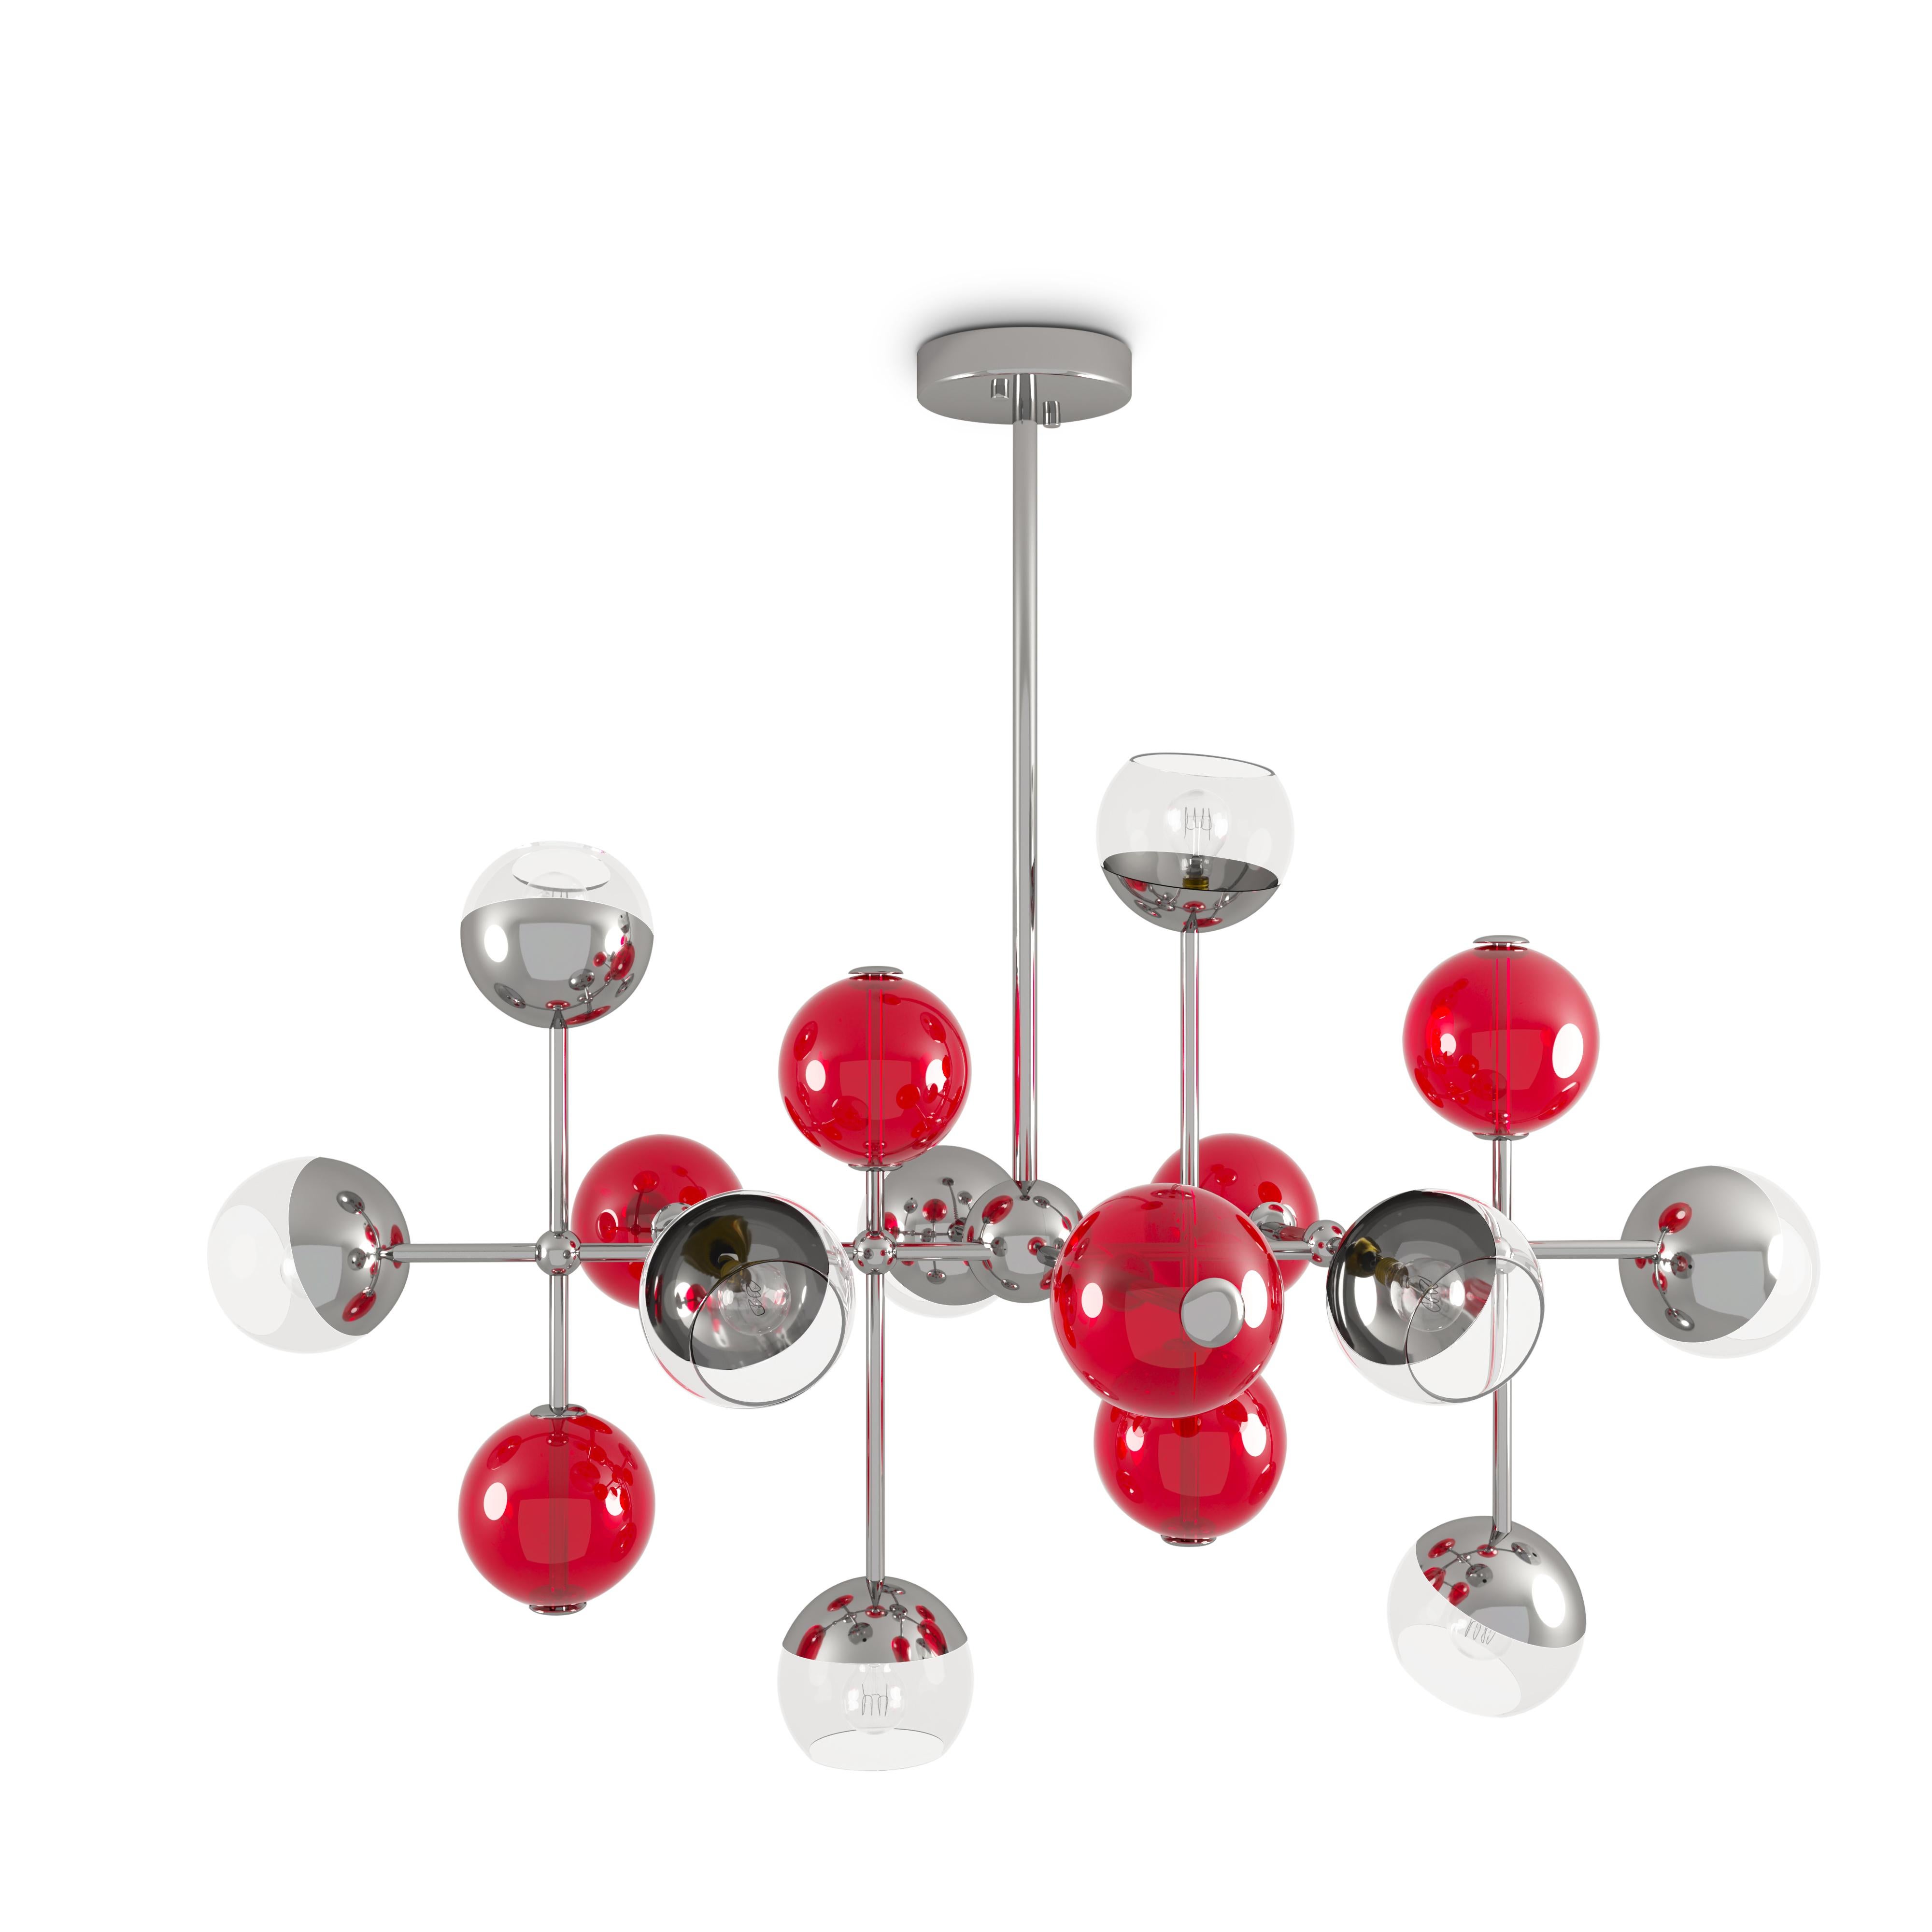 Inspired by the cherry, a fruit so pure but also so seductive, reflecting a feminine side, delicate and ravishing we present the Cherries contemporary suspension lamp. This modern suspension lamp is a distinct, bold and contemporary piece. A daring